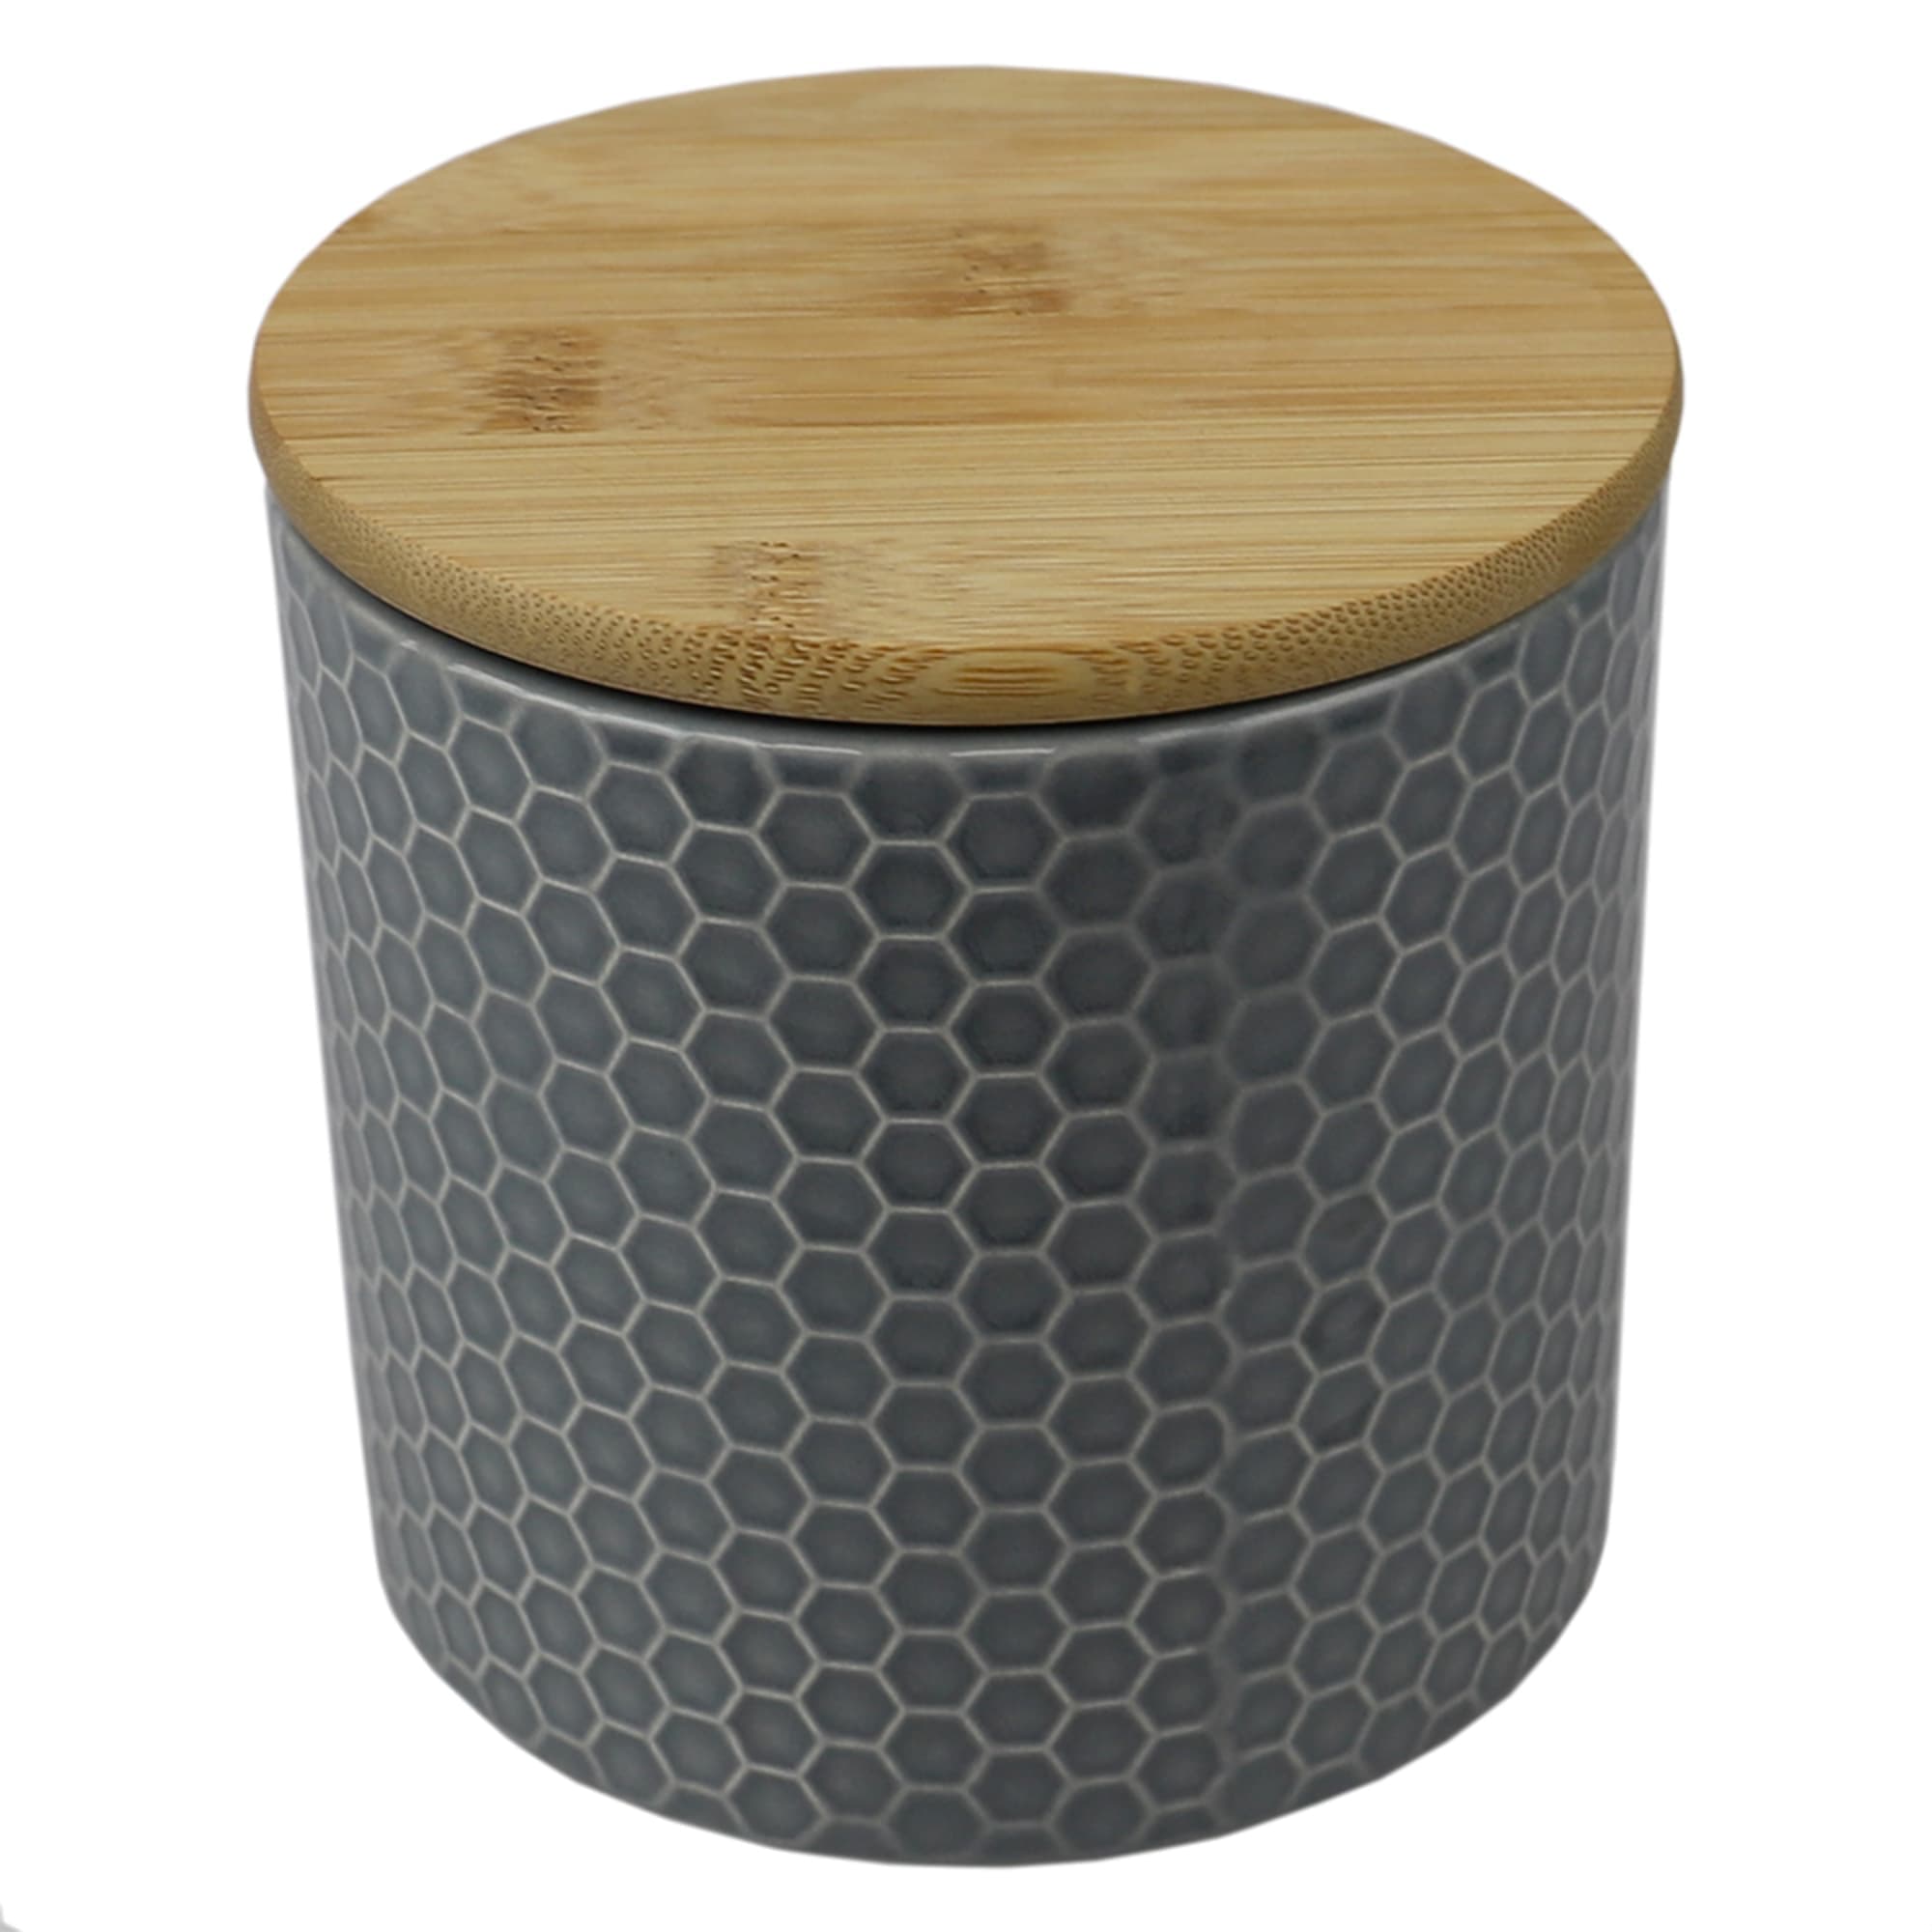 Home Basics Honeycomb Small Ceramic Canister, Grey $5.00 EACH, CASE PACK OF 12